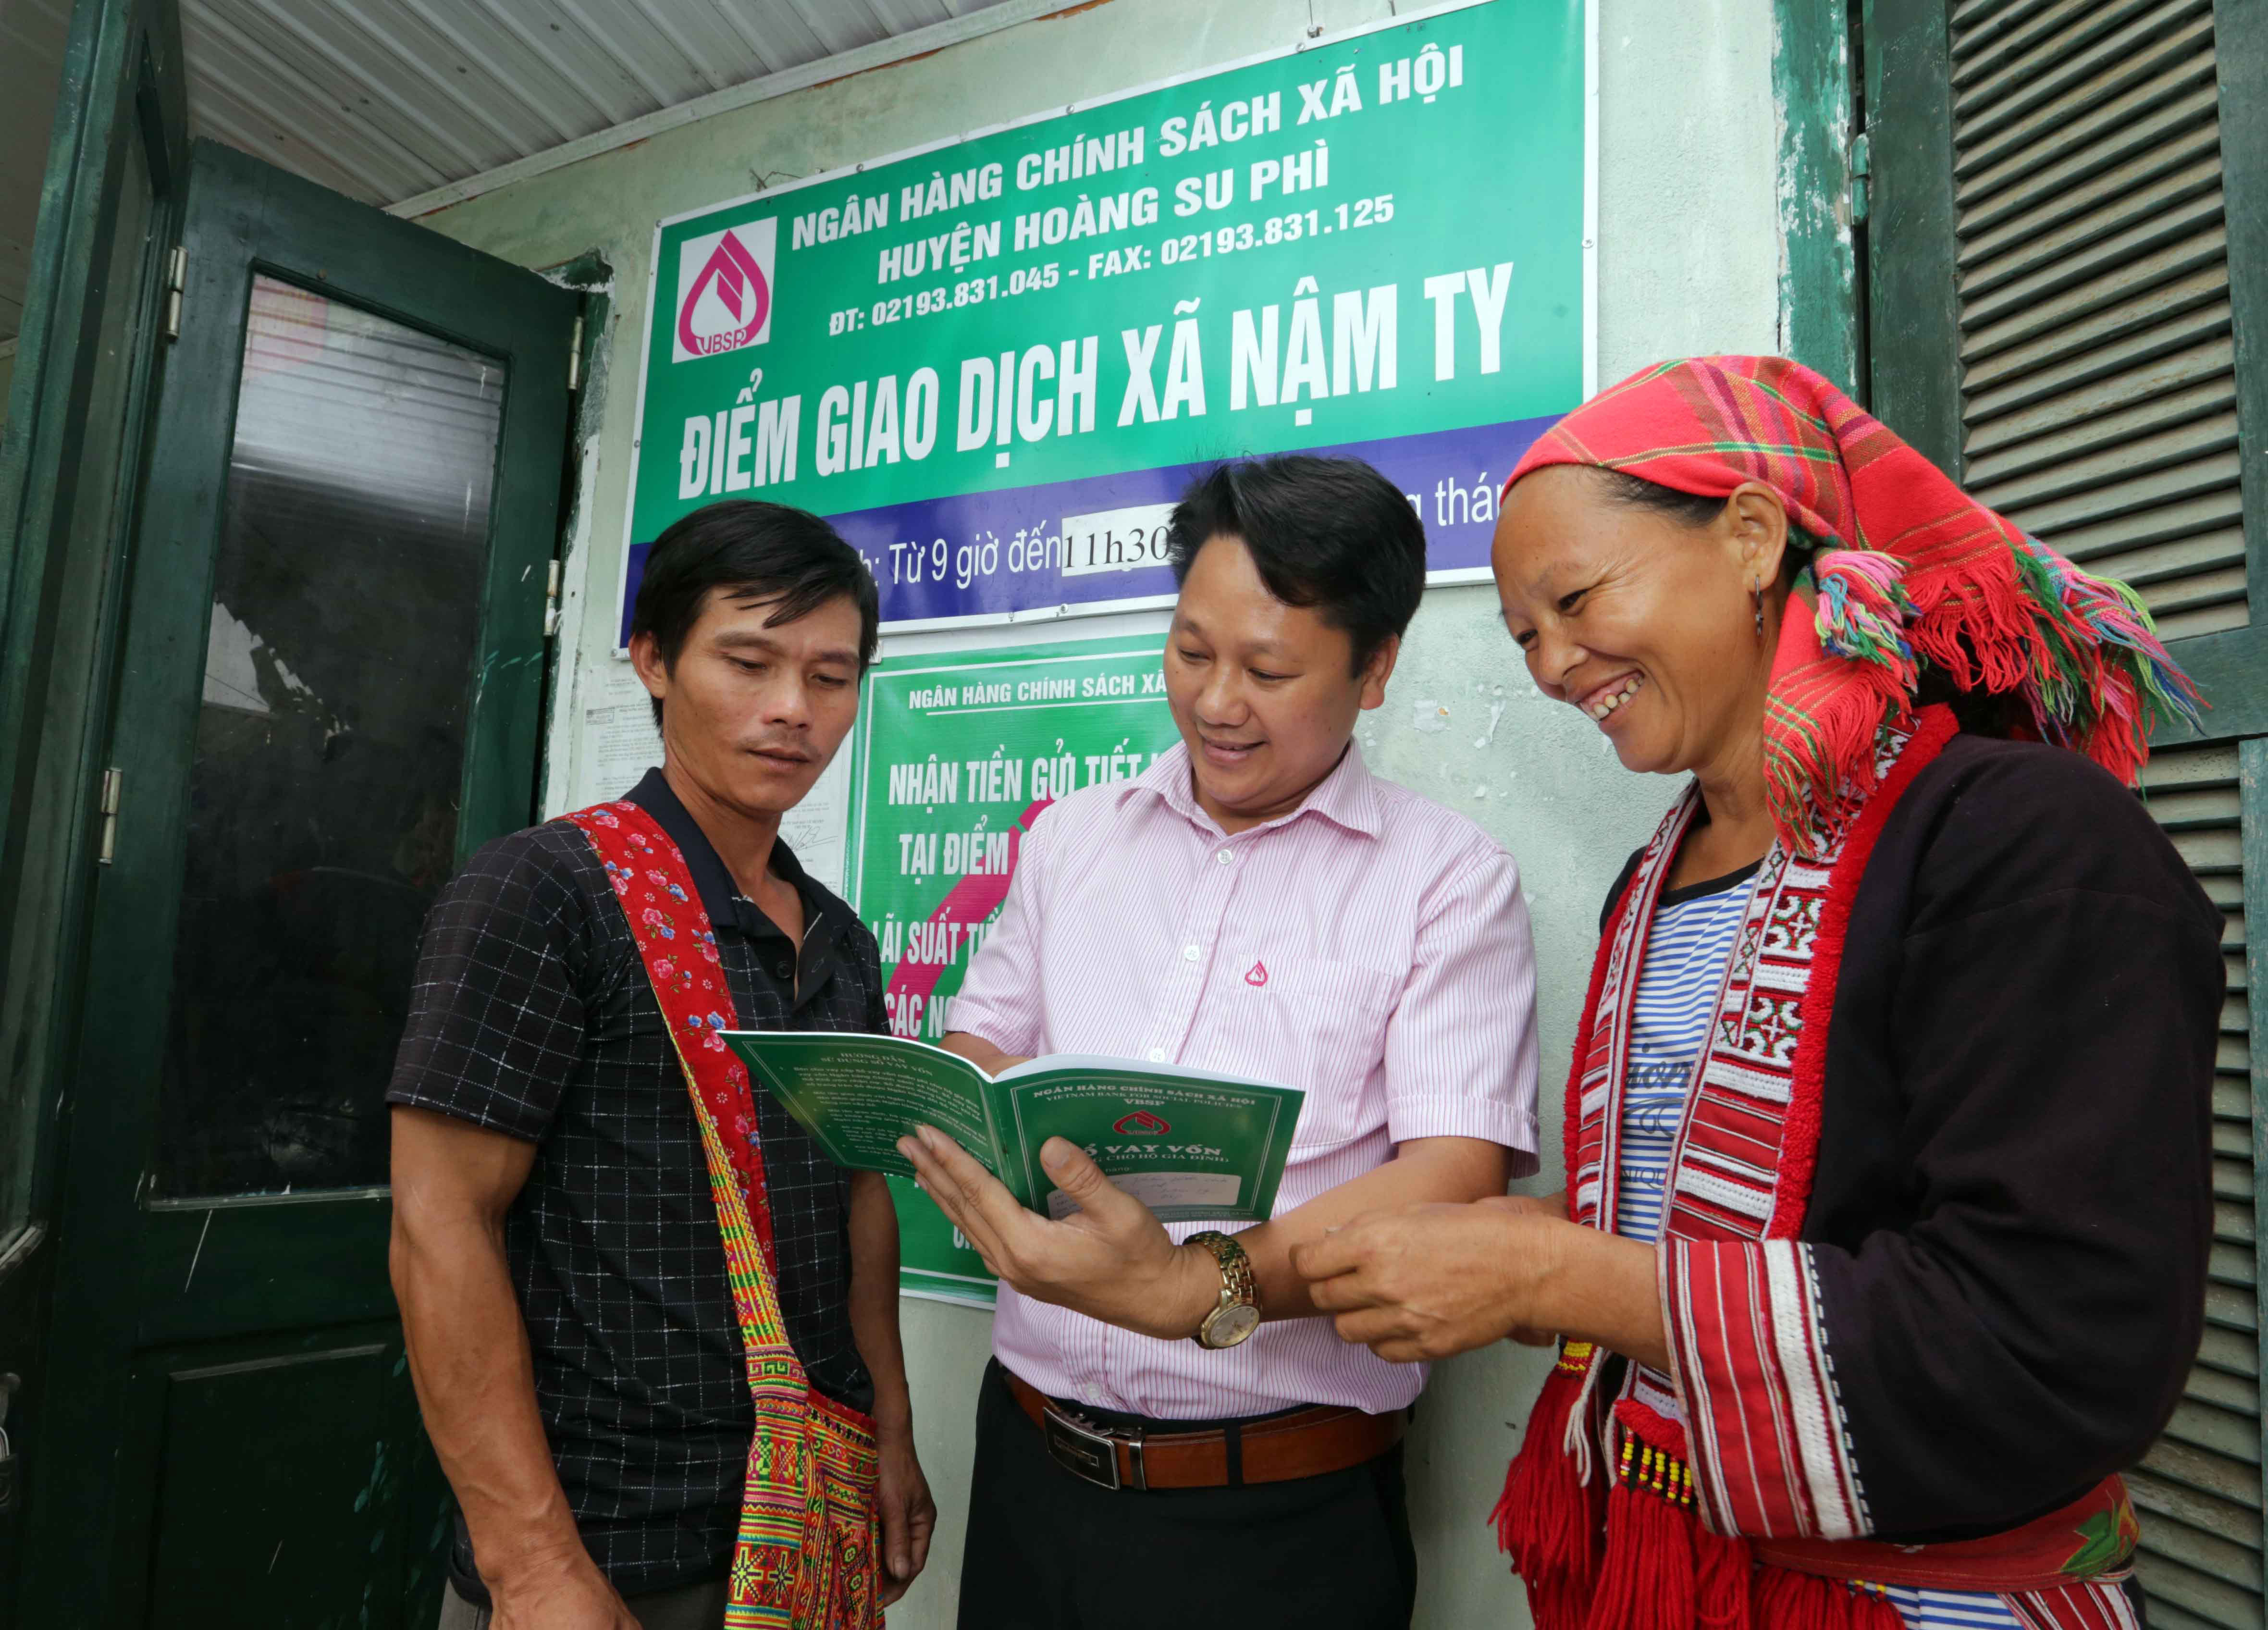 Mobile Phone Banking for the poor to access financial inclusion in Vietnam